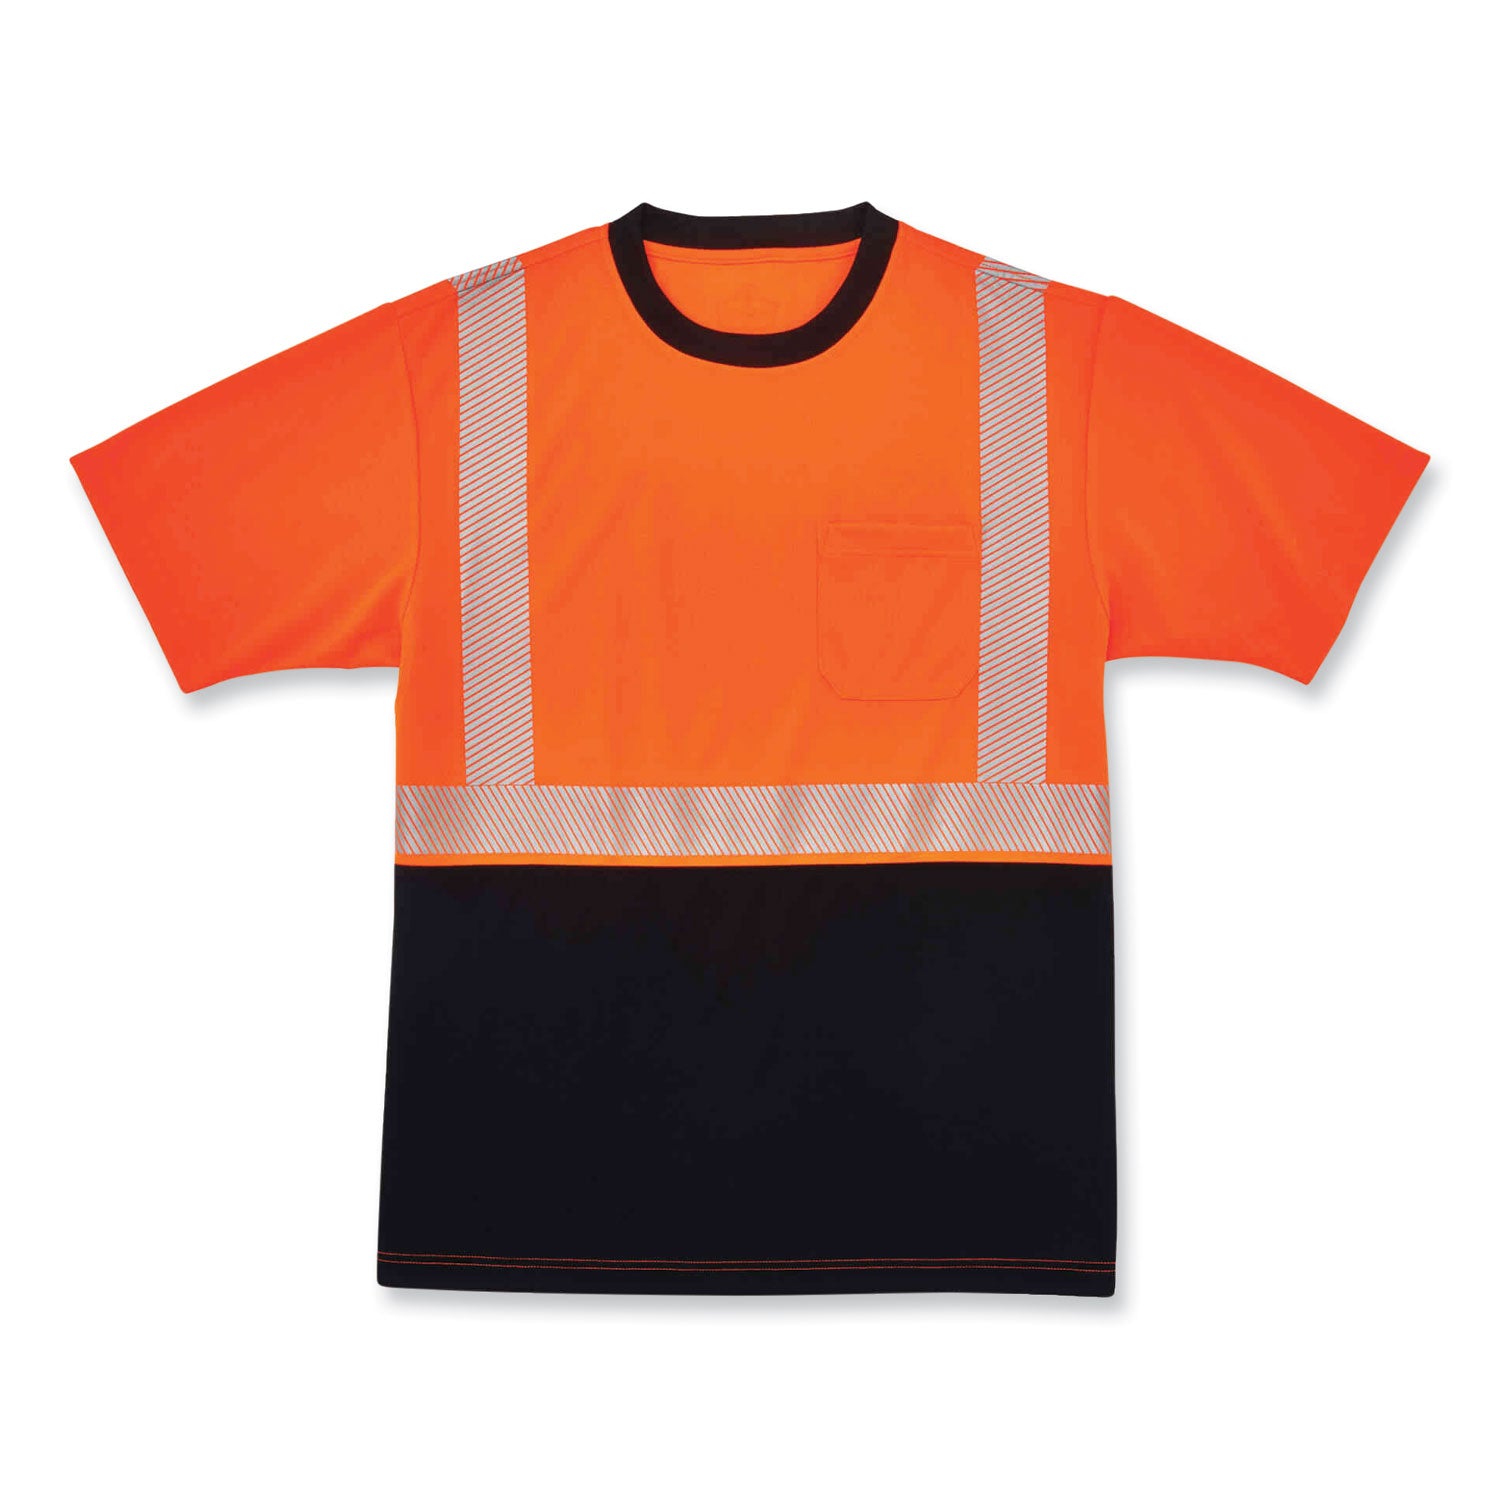 glowear-8280bk-class-2-performance-t-shirt-with-black-bottom-polyester-small-orange-ships-in-1-3-business-days_ego22582 - 1